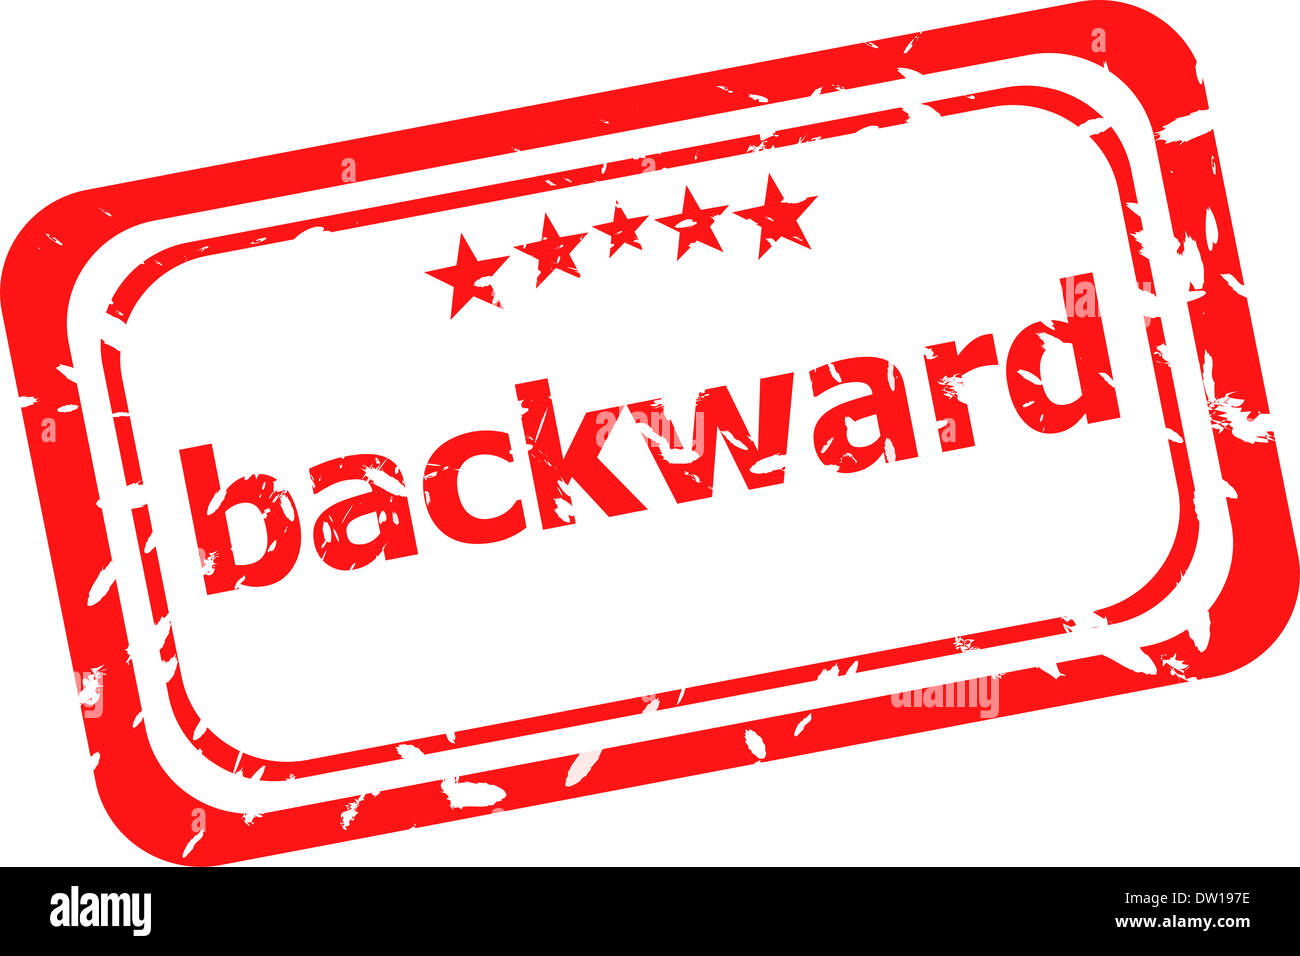 backward word on red rubber grunge stamp Stock Photo